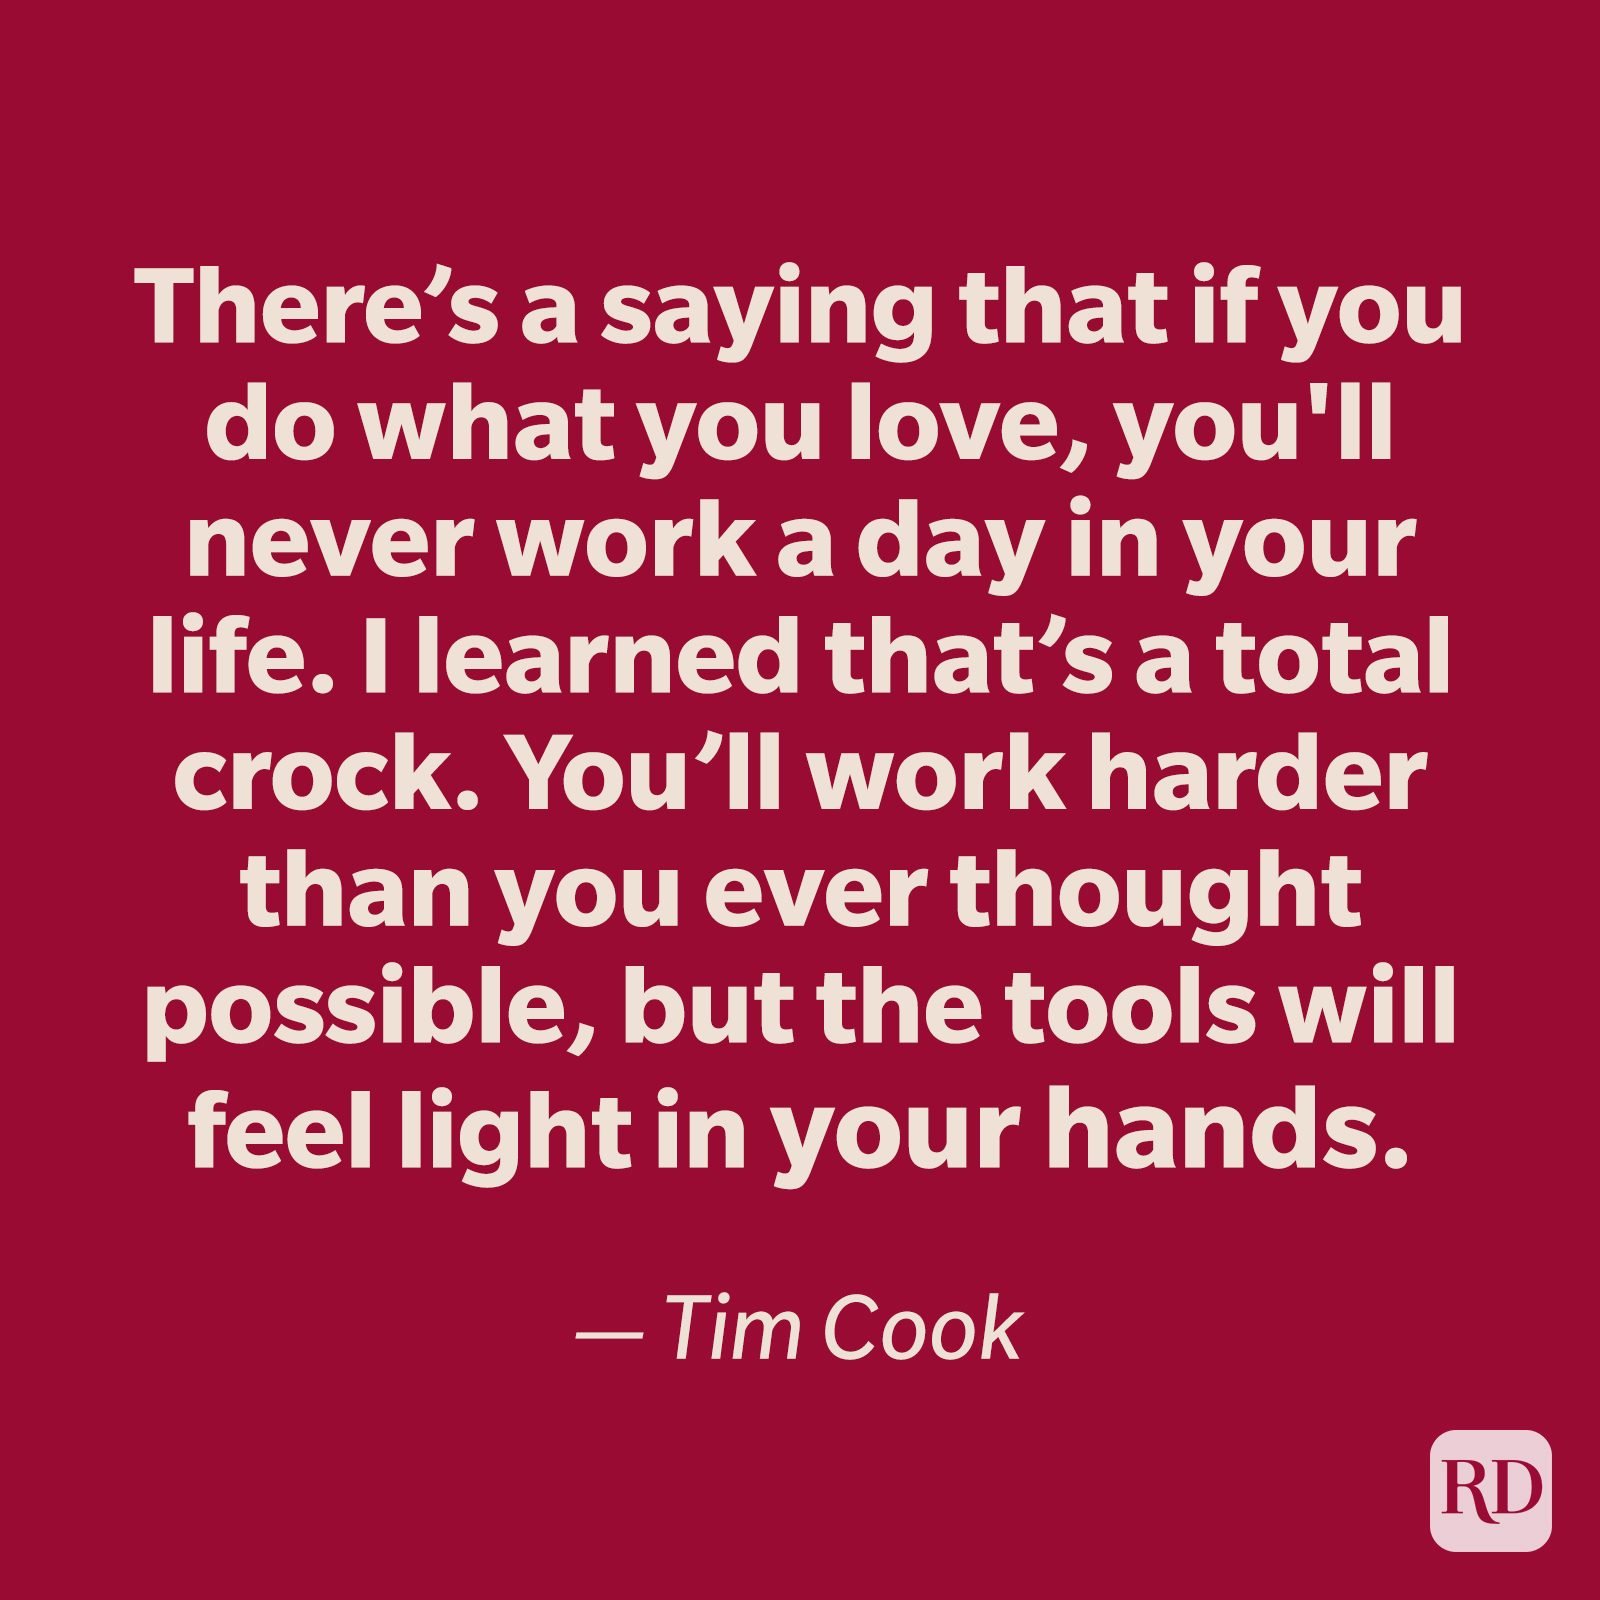 Tim Cook quote